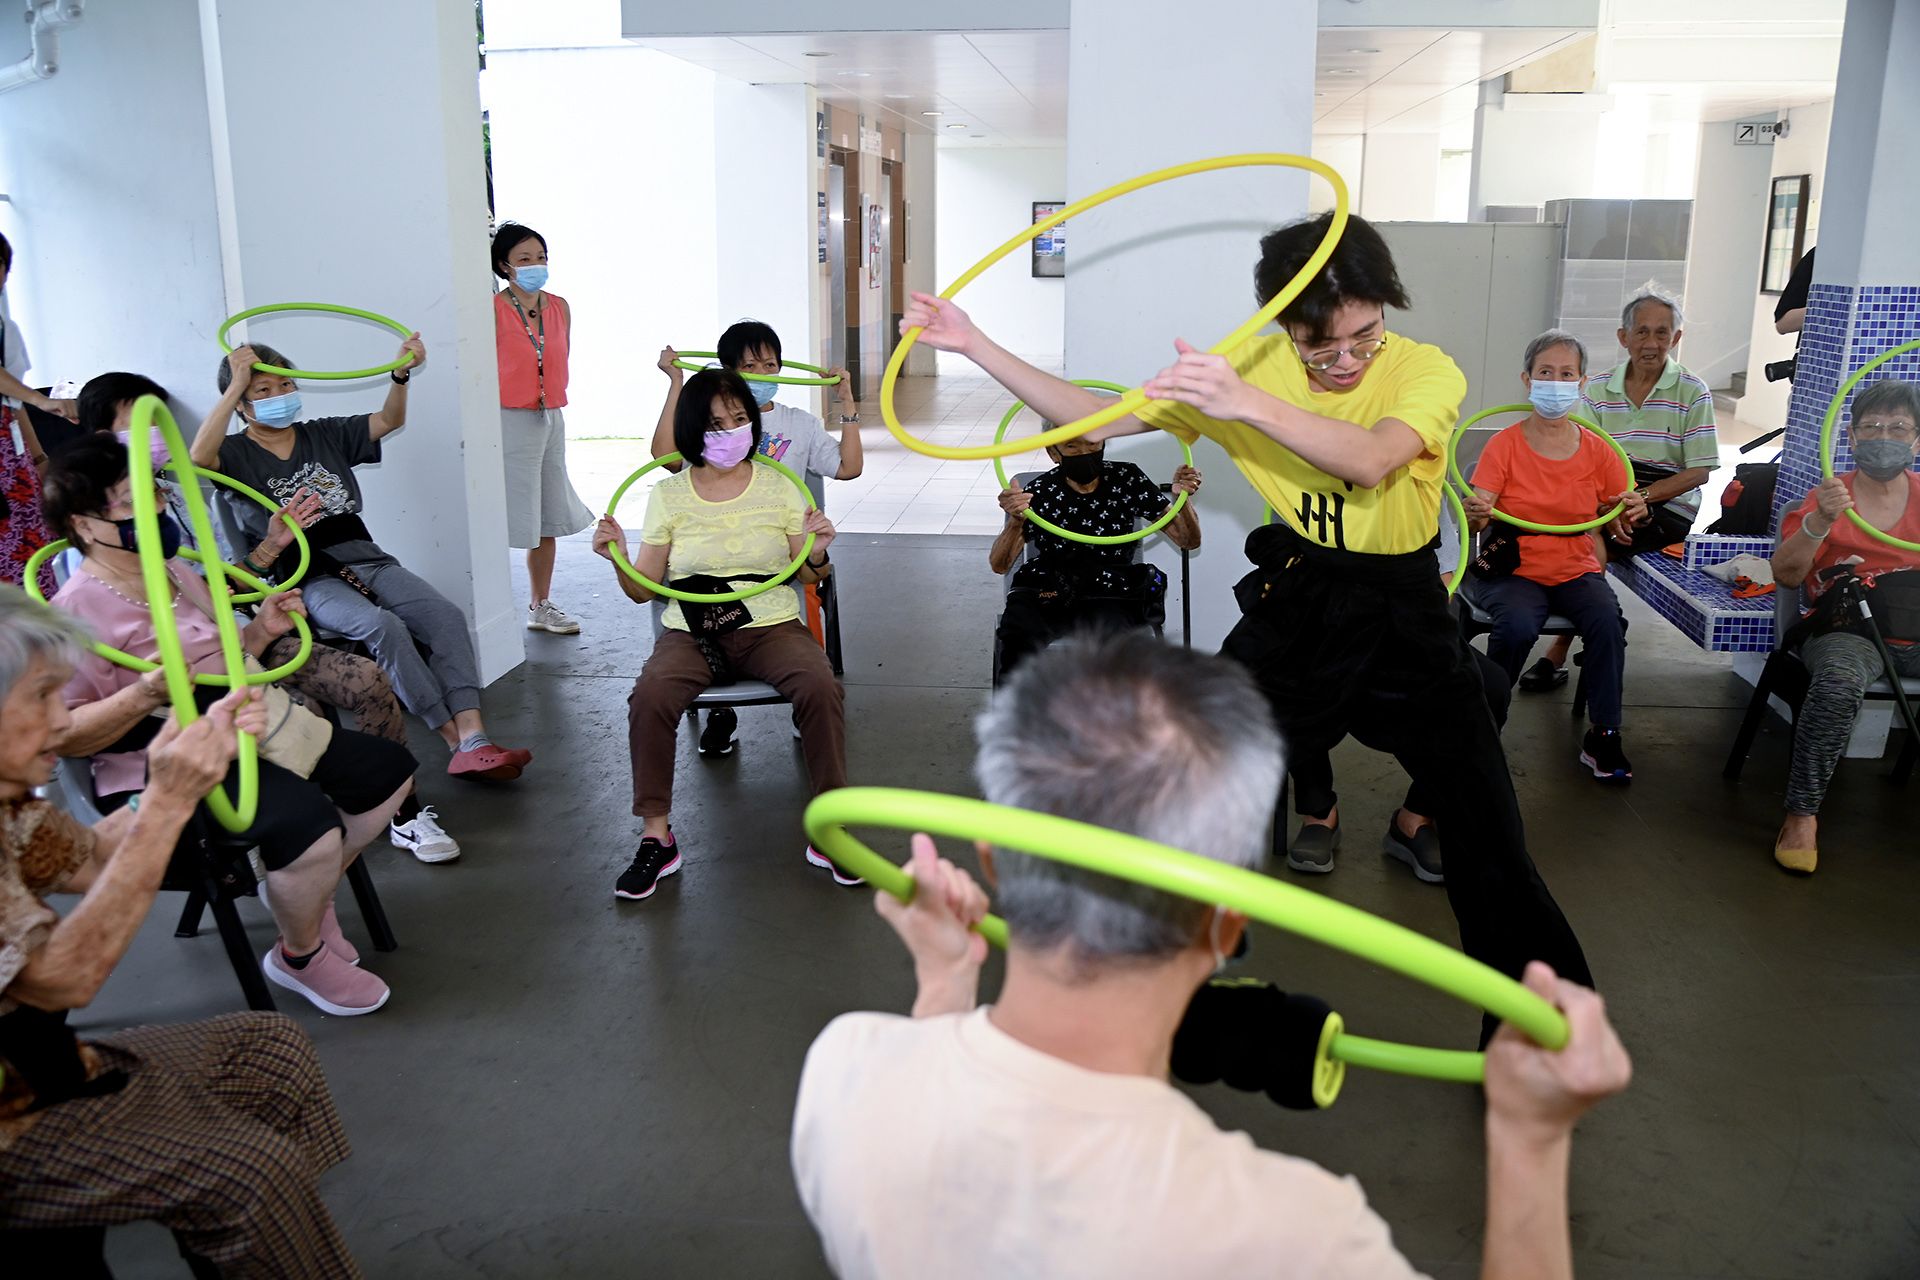 Kong Chow Wui Koon lion dance troupe member Lucas Ow, 16, leading seniors in a series of lion dance moves using a hula hoop to simulate holding a lion head, outside Fei Yue Active Ageing Centre in Holland Close on Dec 29, 2023.